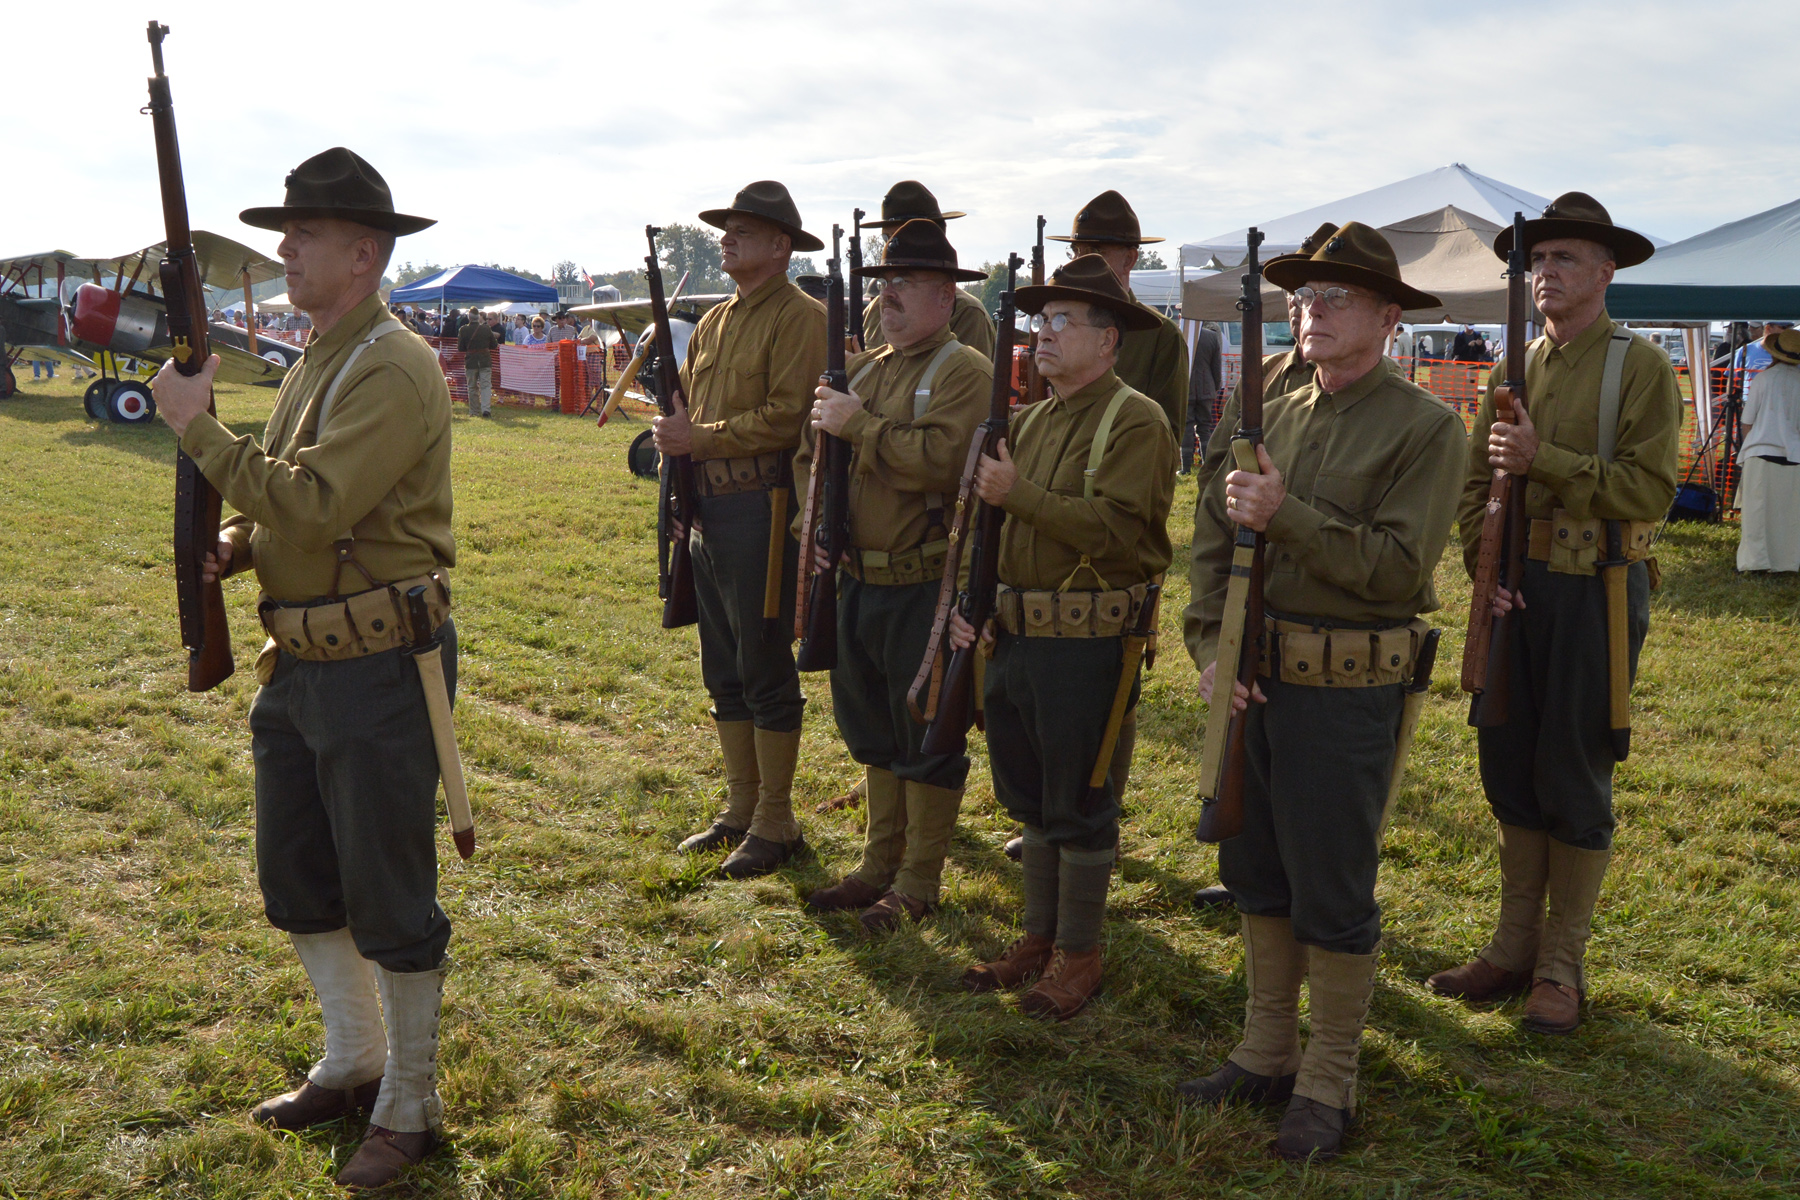 Re-enactors will perform skits in a war encampment during the WWI Dawn Patrol Rendezvous, Oct. 1-2, 2016, at the National Museum of the U.S. Air Force. (U.S. Air Force photo)